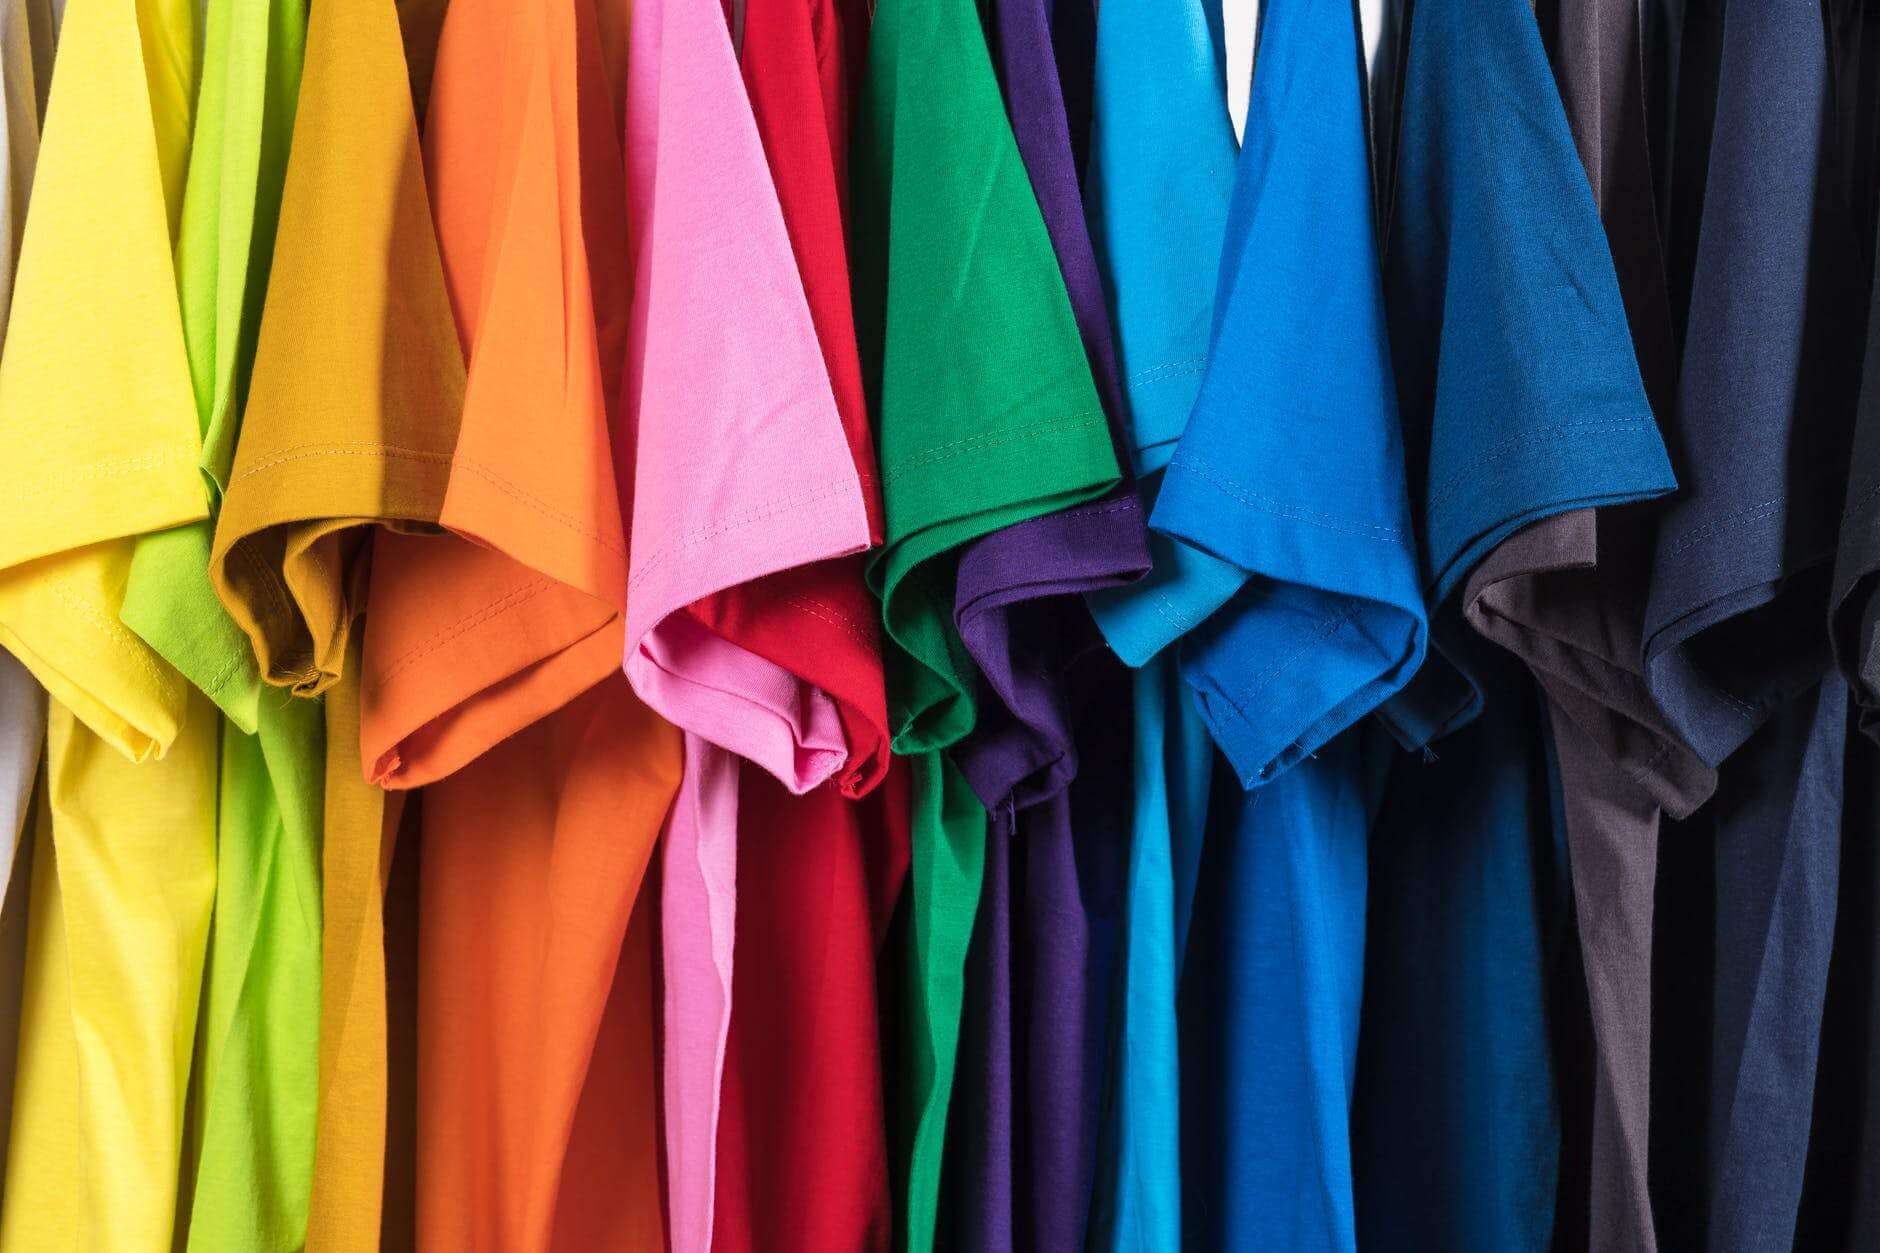 set of multicolored t shirts hanging in row